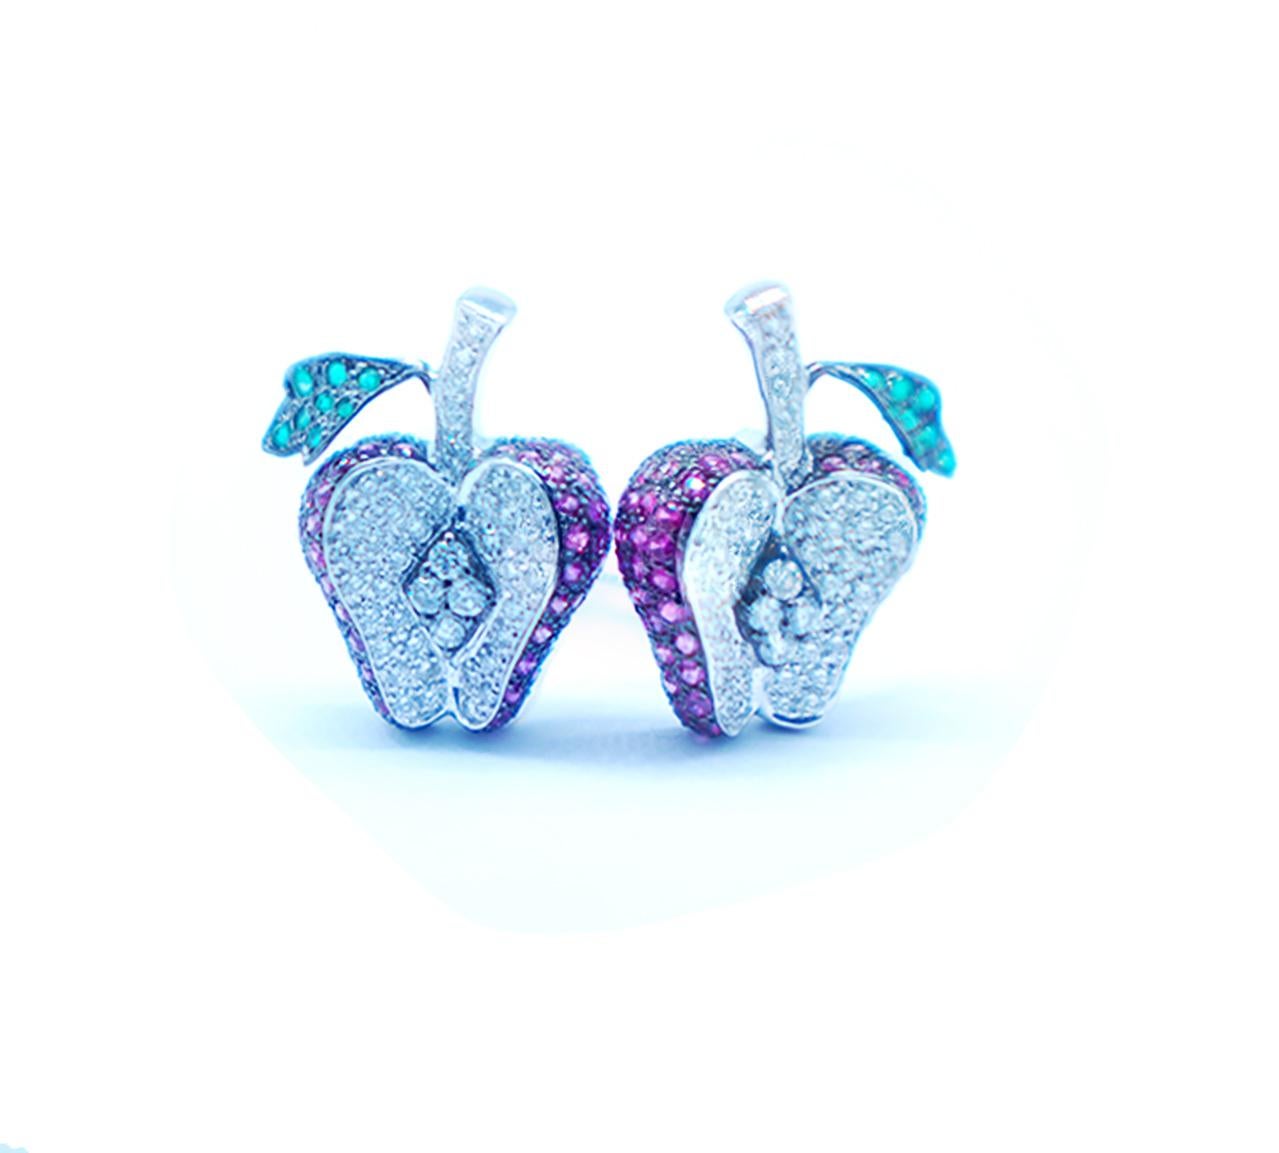 Ruby and Diamond Pave Apple Earrings 18 Karat Gold Tsavorite Green having an estimated total weight of 4 carats.

These are a gorgeous pair of earrings where the Apple is three-dimensional & shows off the artist careful execution of a fine piece of